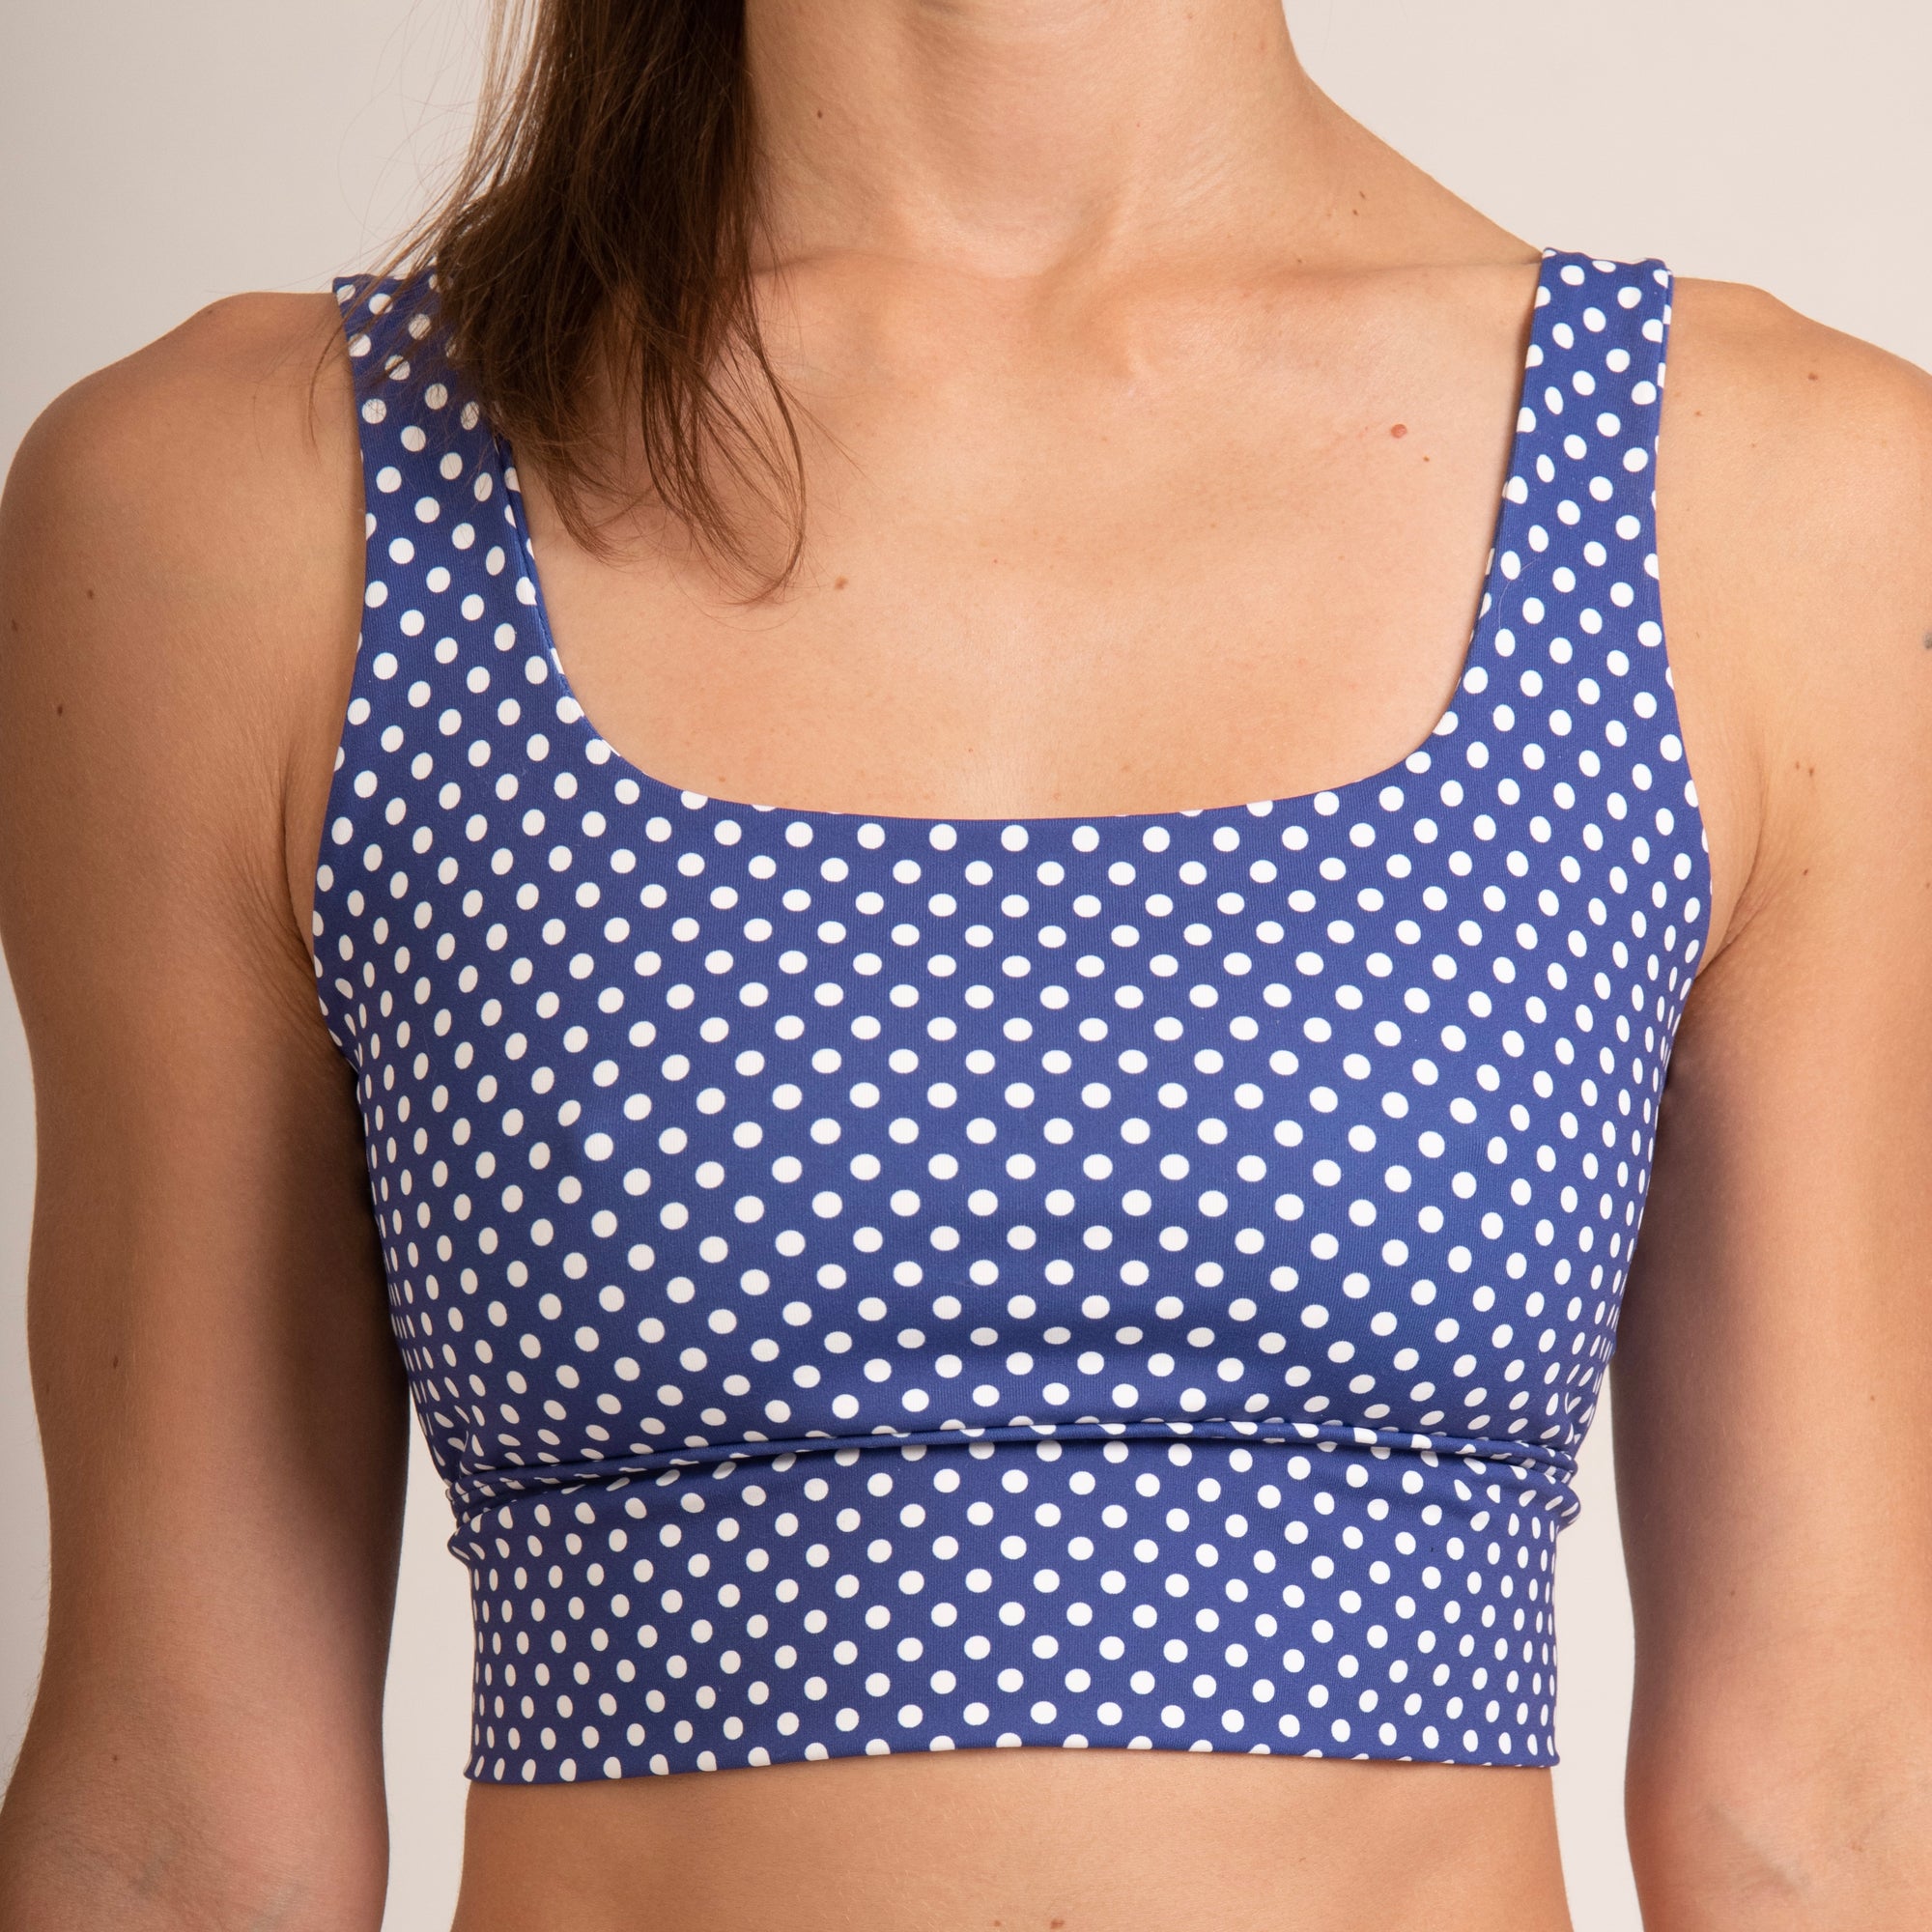 Beauty for Ashes Teal Crown Sports Bra – Clothed In Radiance LLC